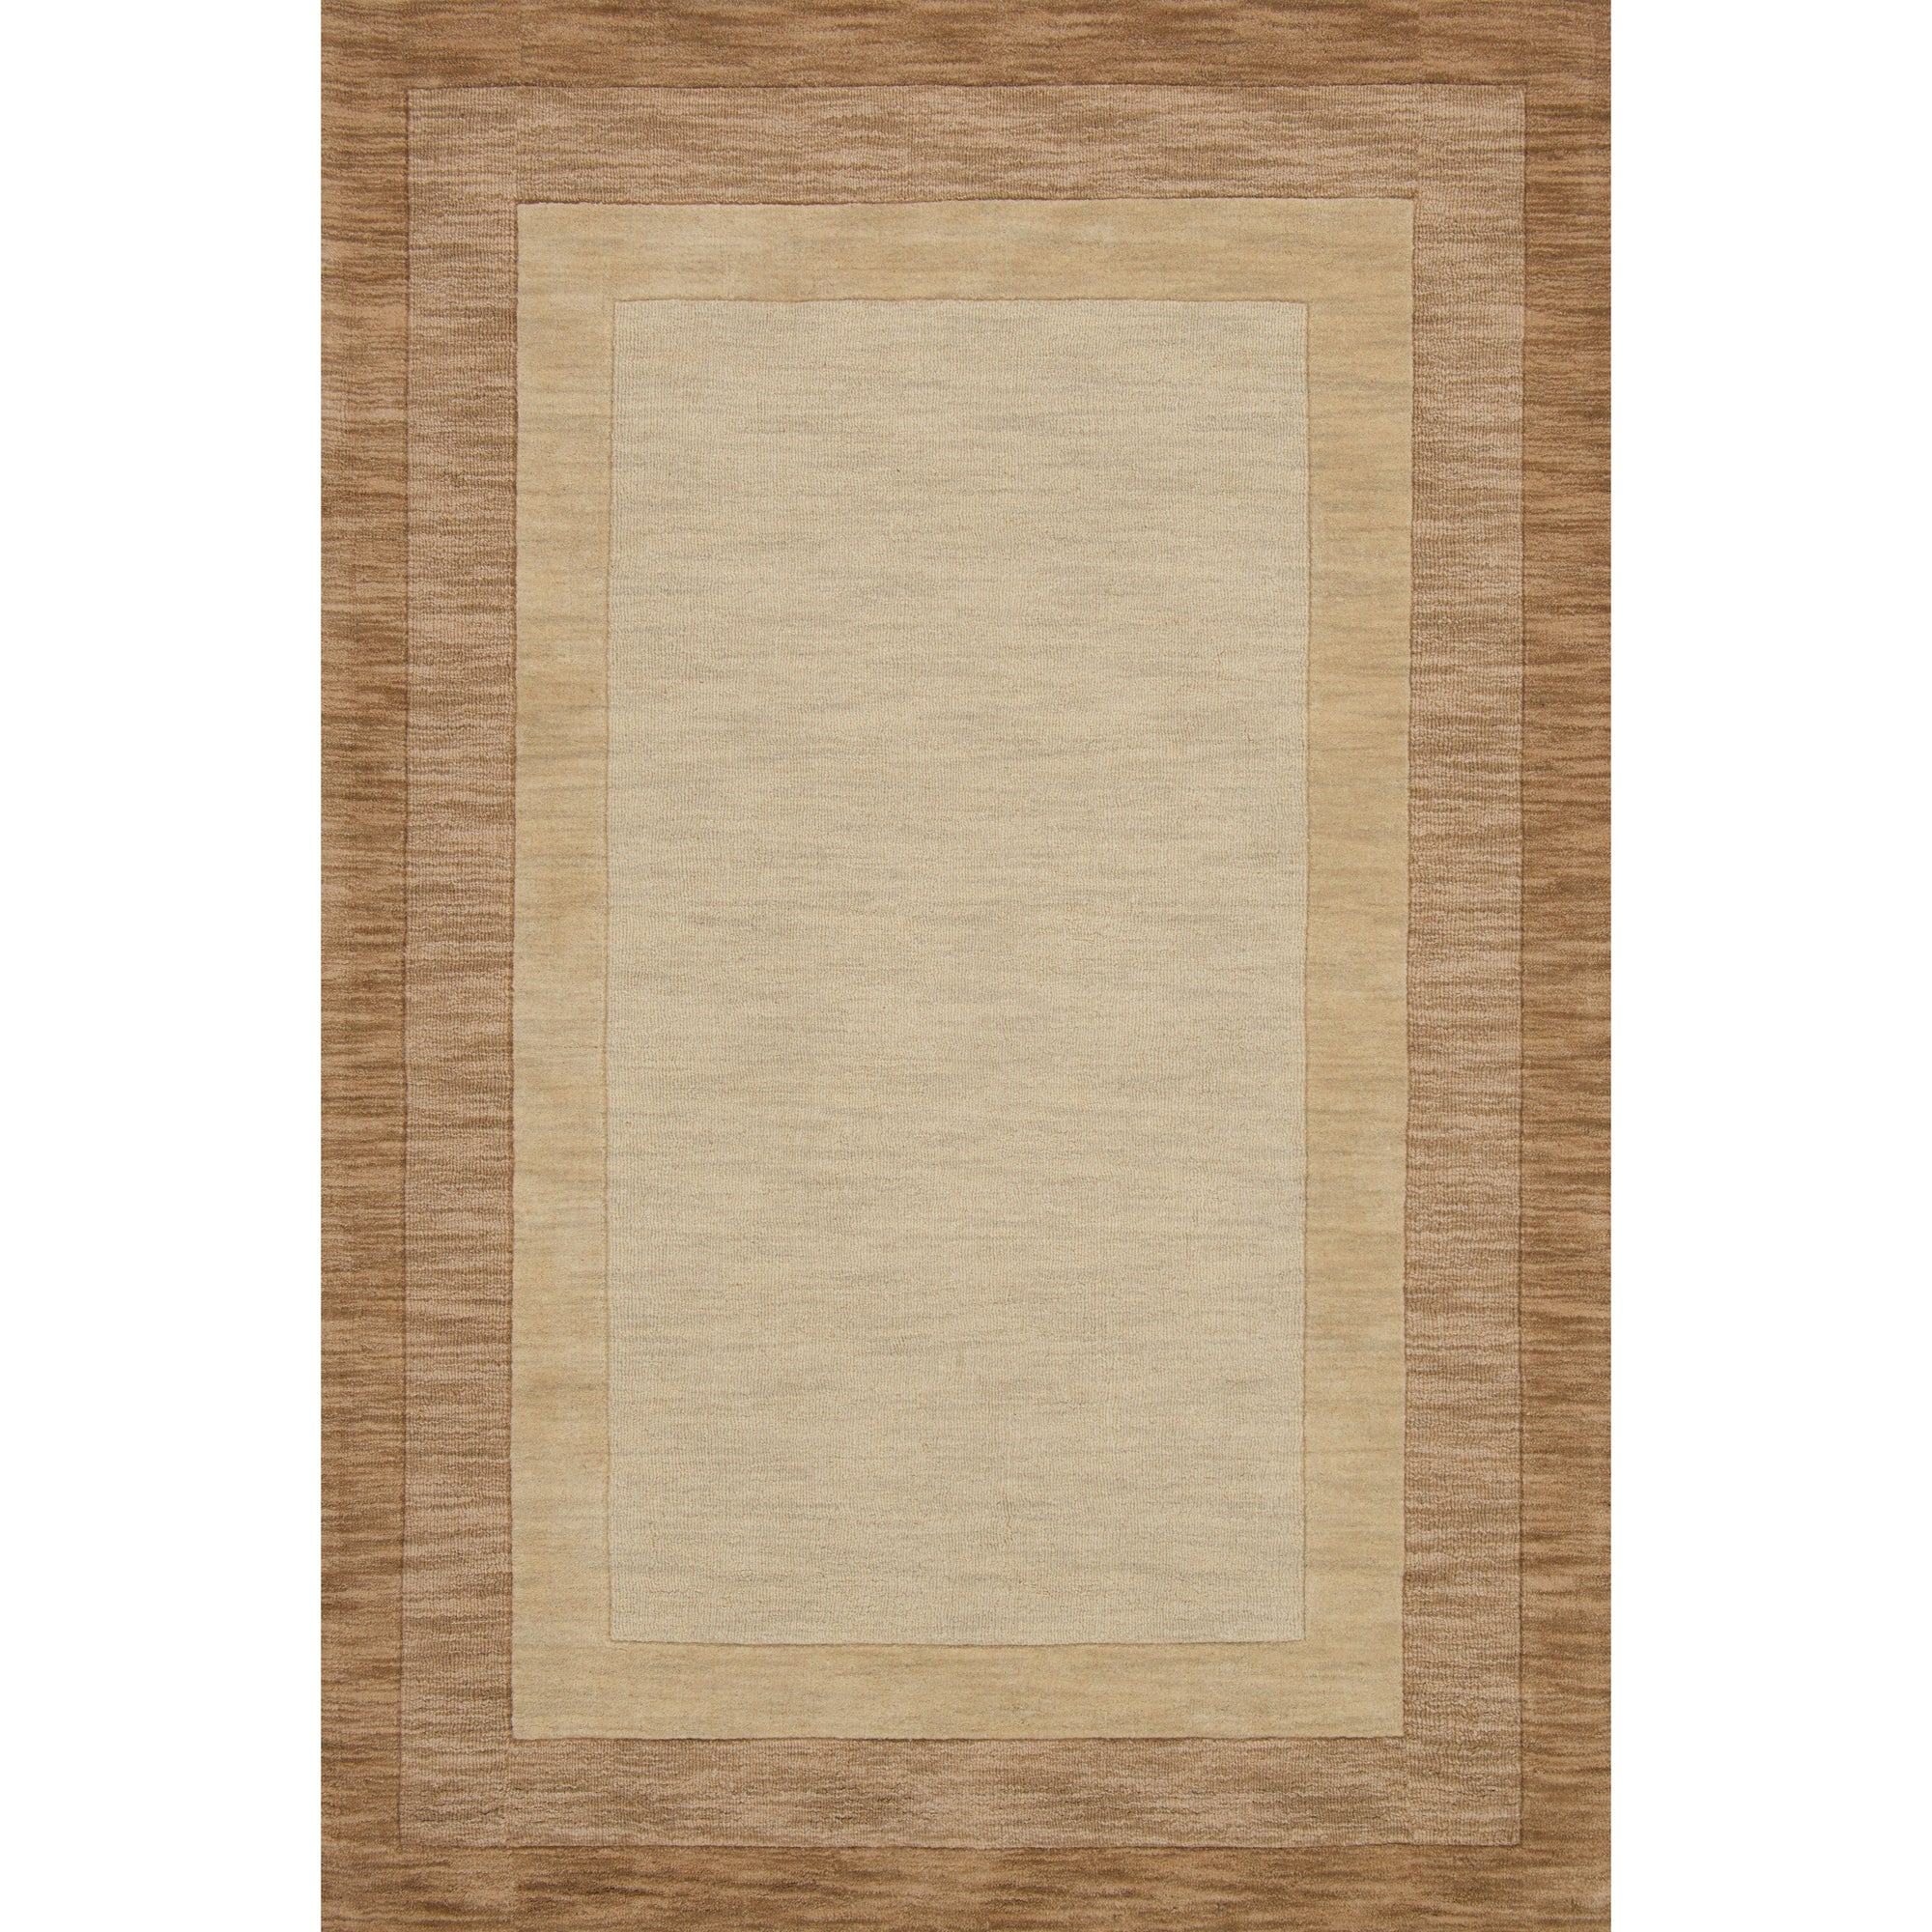 Rugs by Roo Loloi Hamilton Beige Area Rug in size 18" x 18" Sample